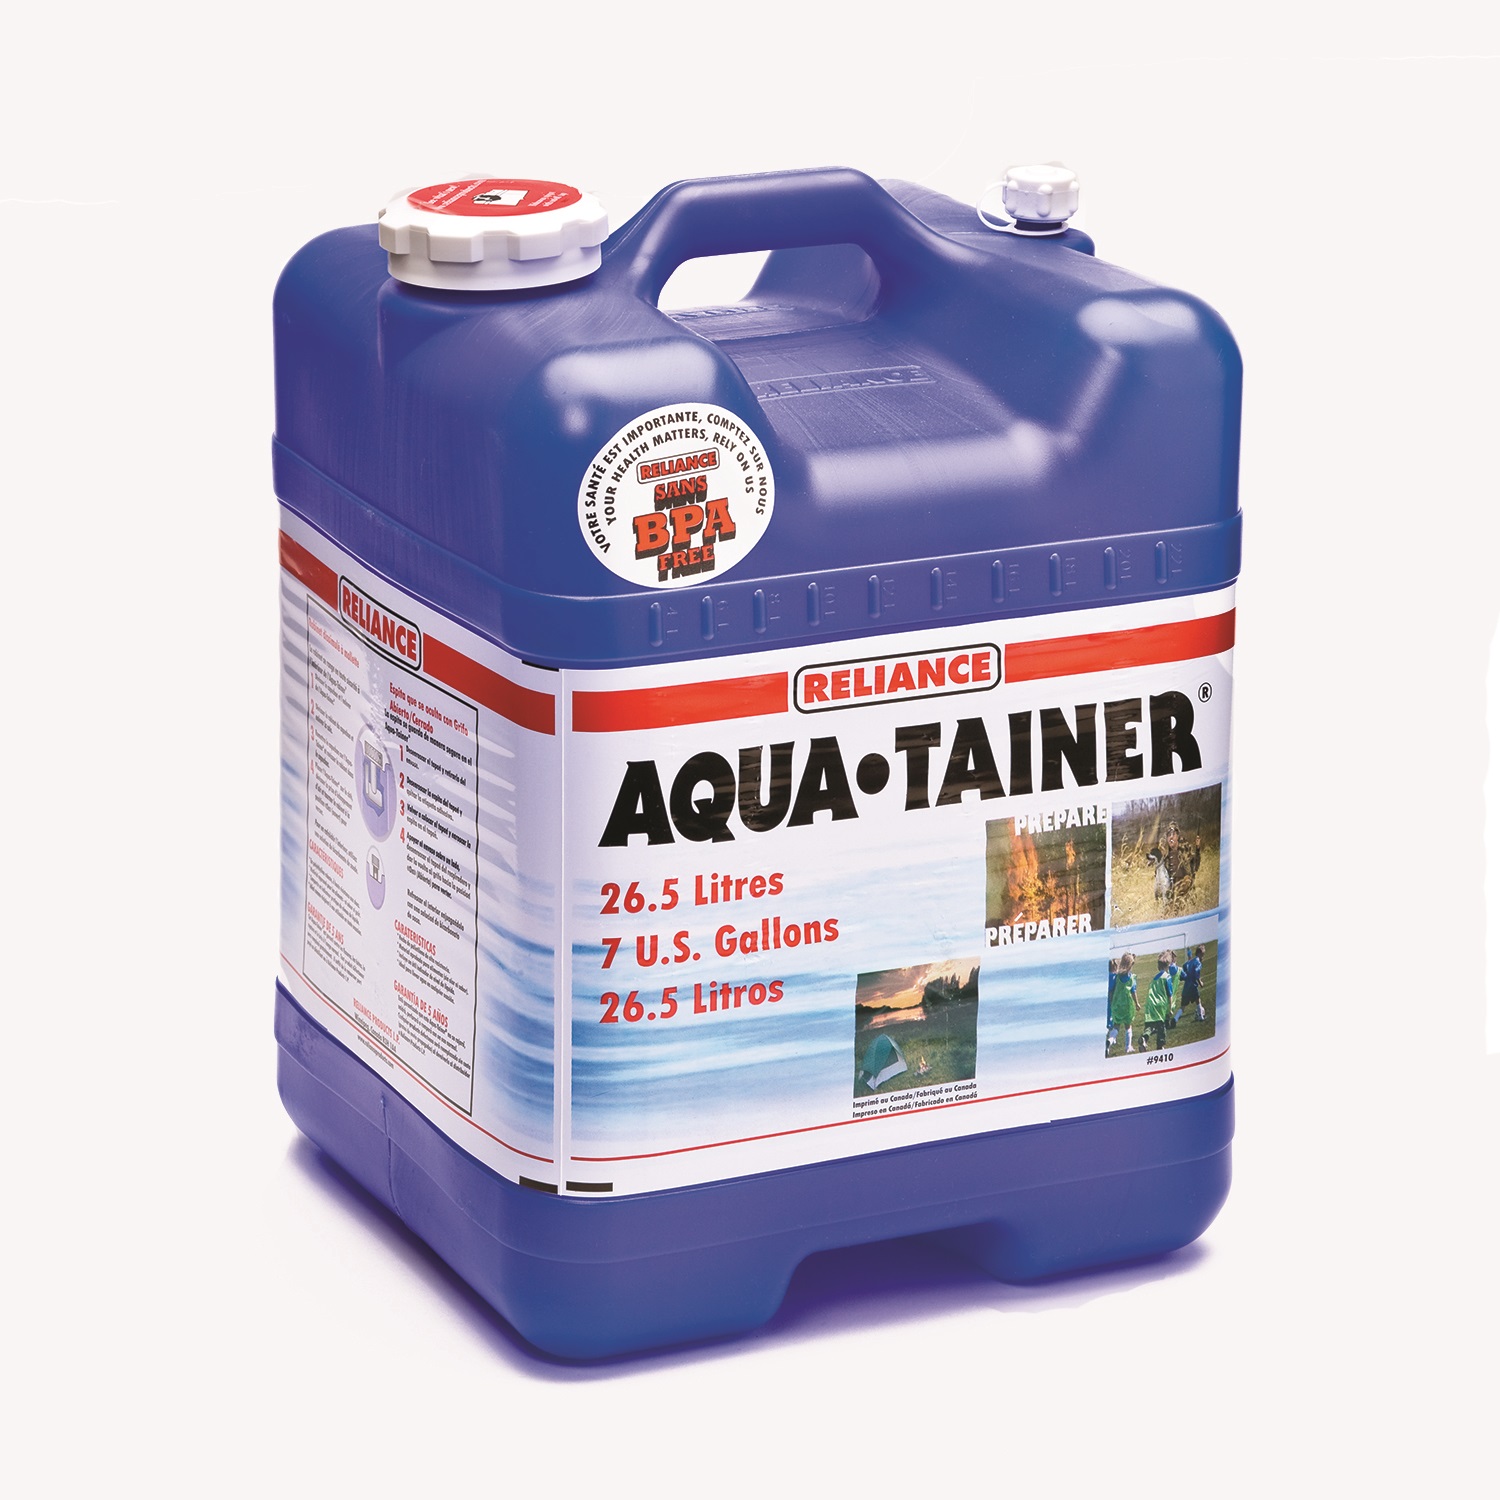 Reliance Aqua-tainer Water Container 7 Gallon - 9410-03